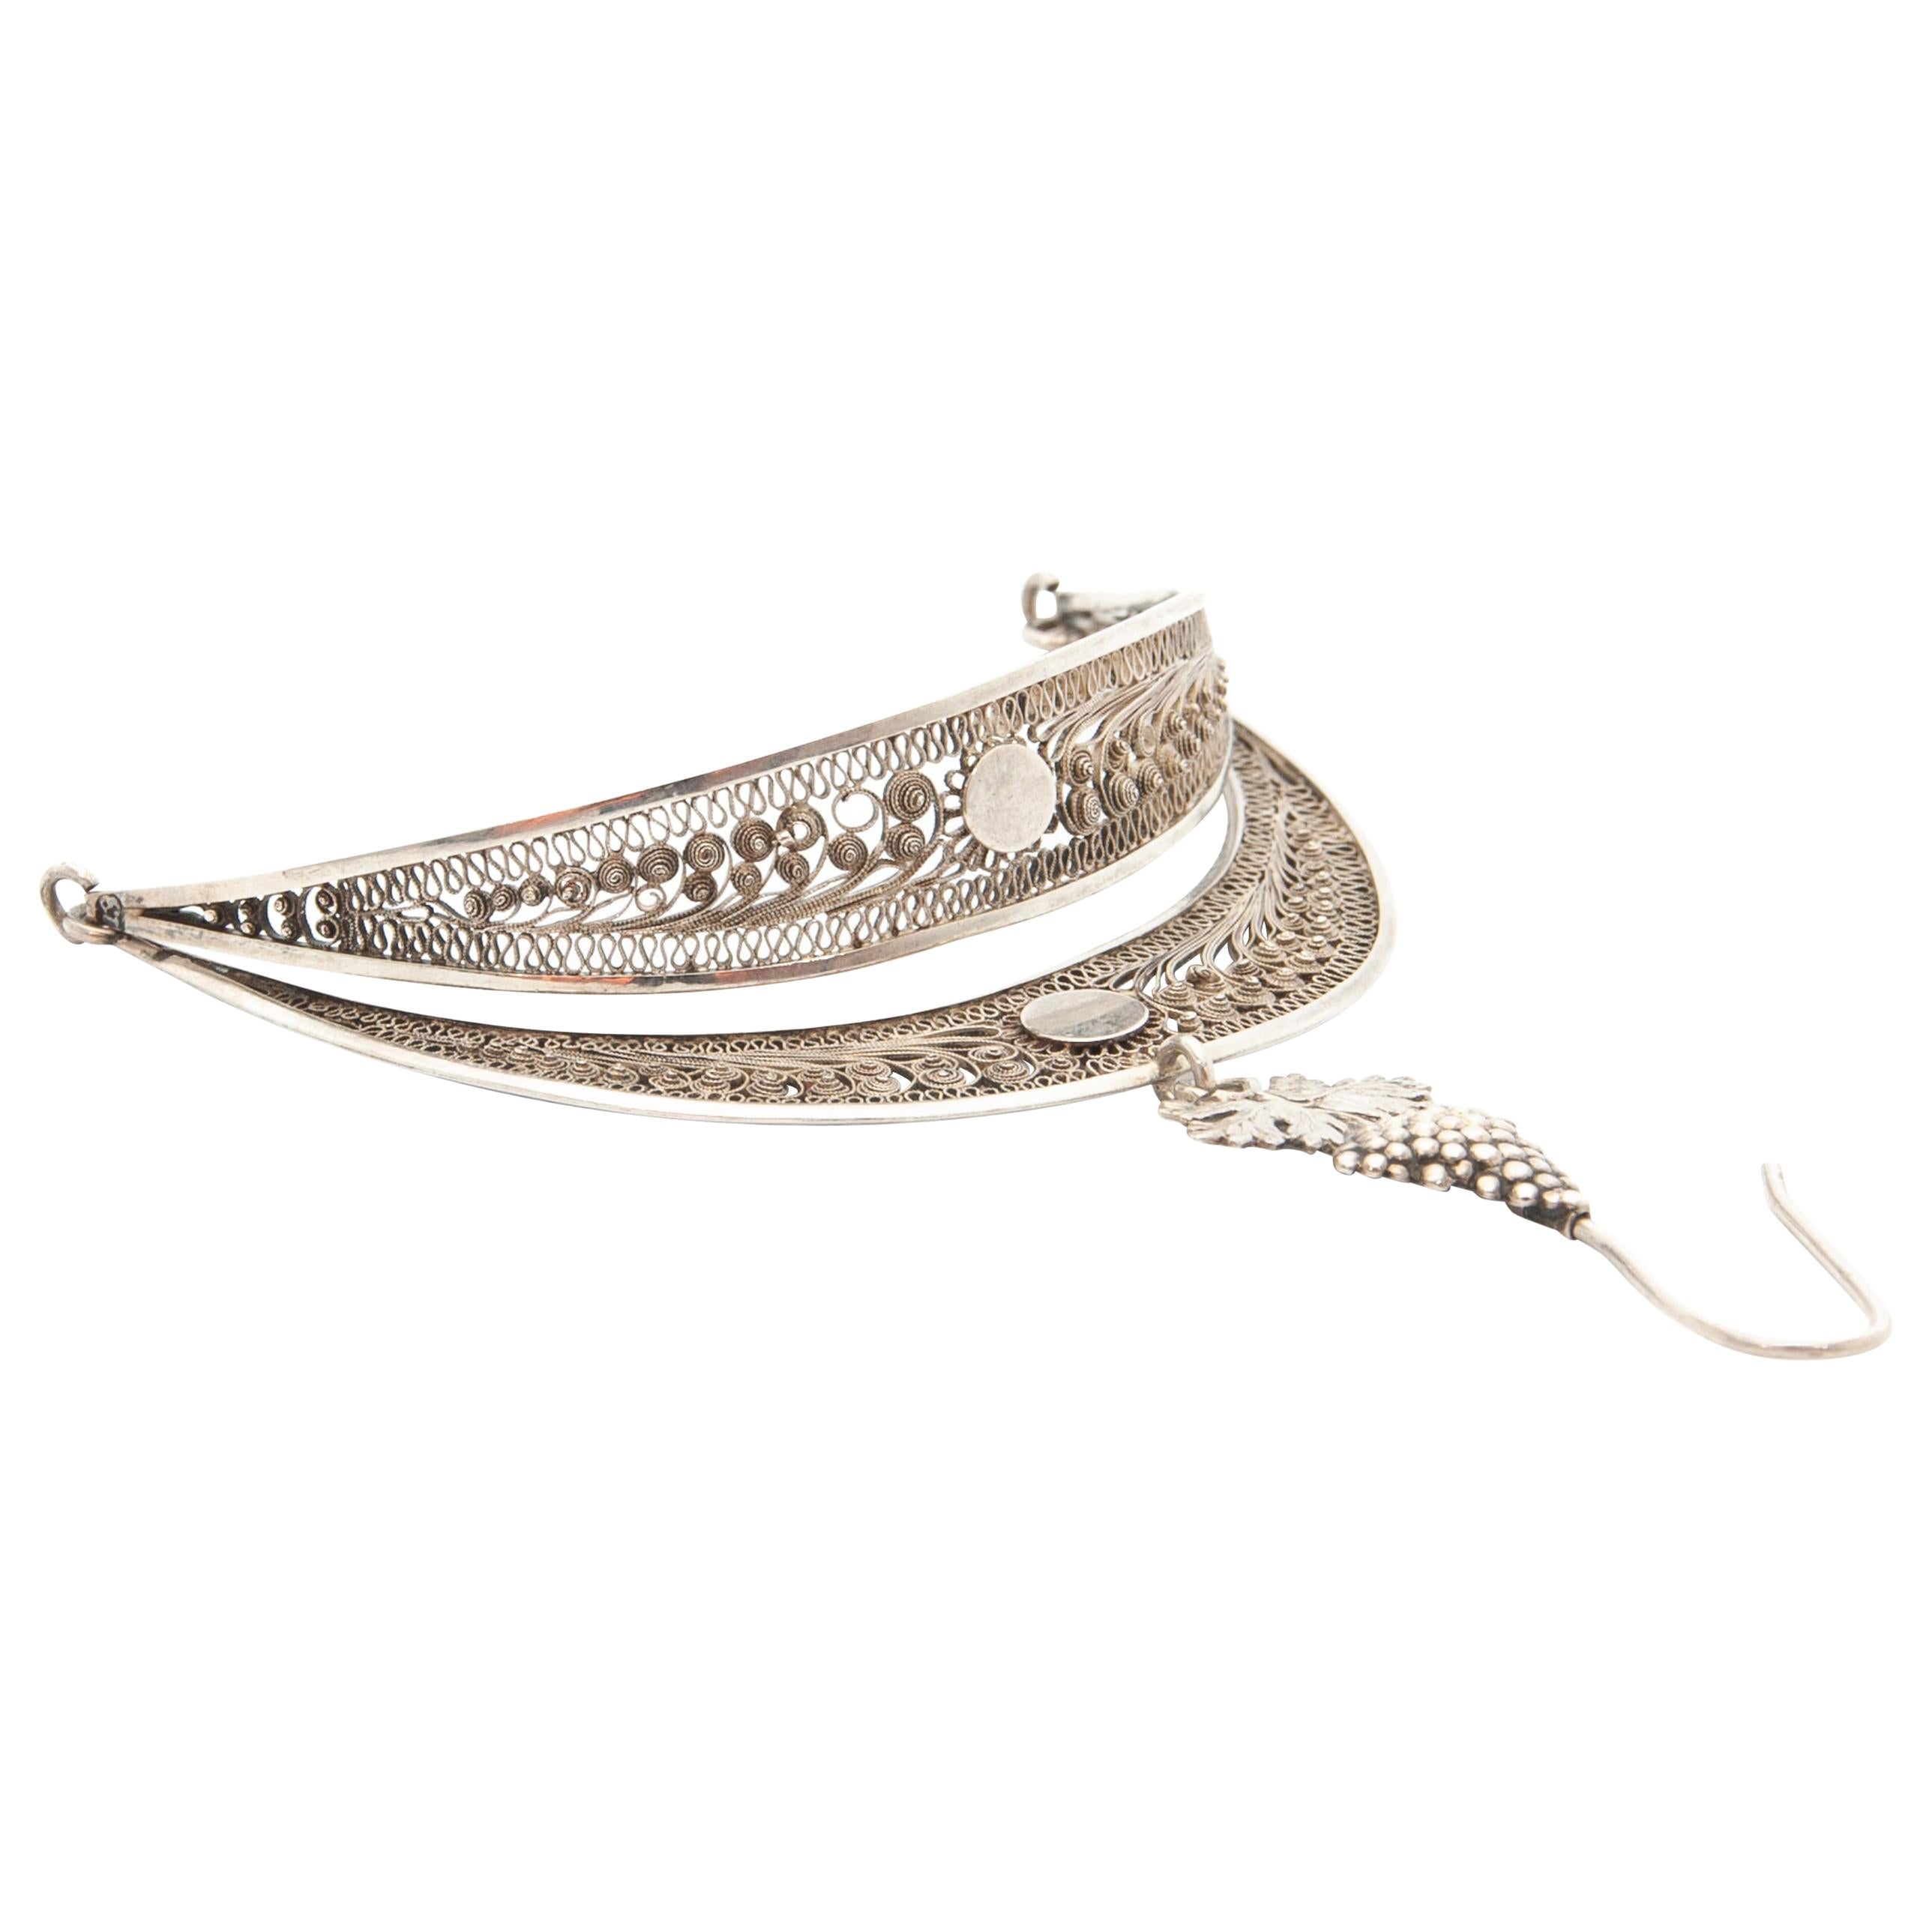 Early 20th Century Silver Filigree Clutch Bag Purse Handle  For Sale